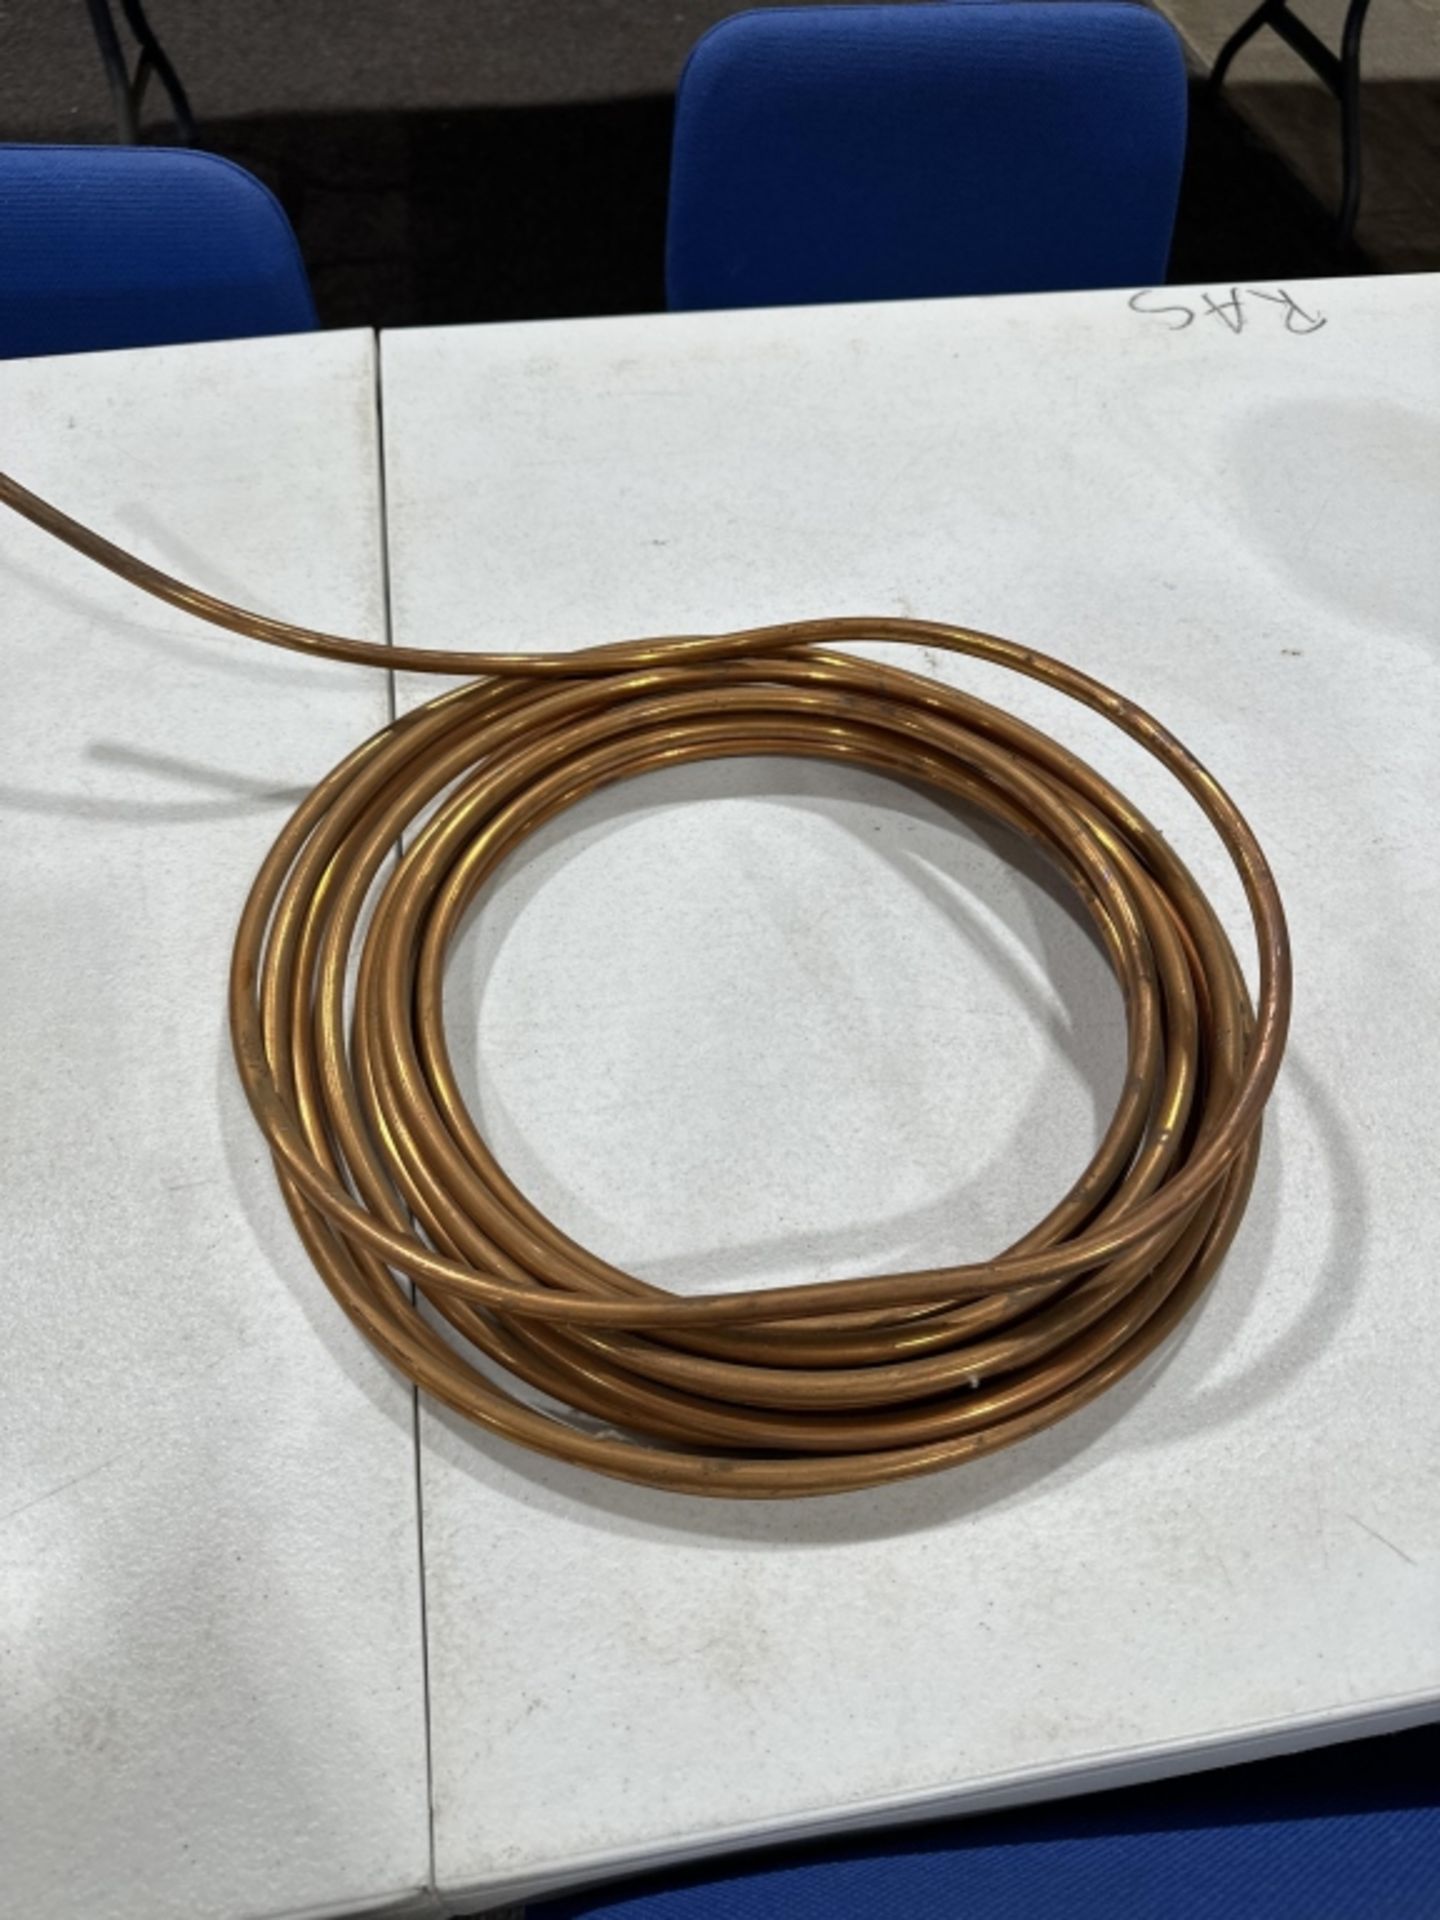 3/8" Copper Tubing - Image 2 of 4